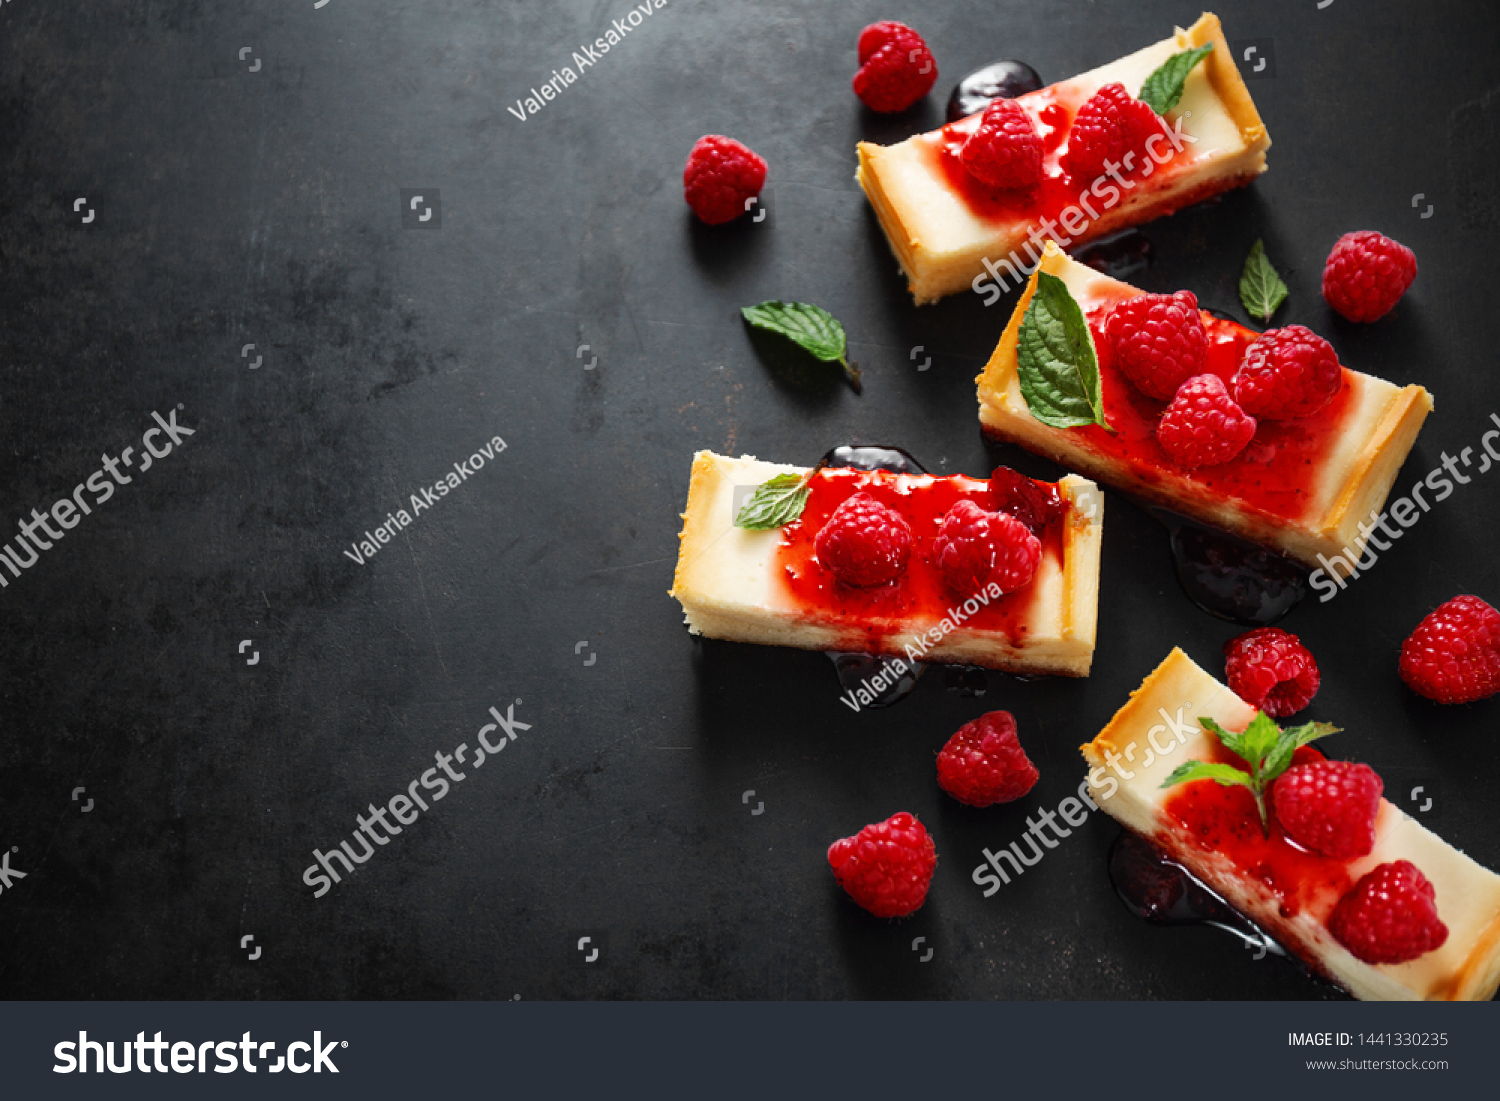 Sweet tasty background. Tasty cheese cake served with sauce, mint and raspberry on dark background. Copy space. Horizontal.  #1441330235